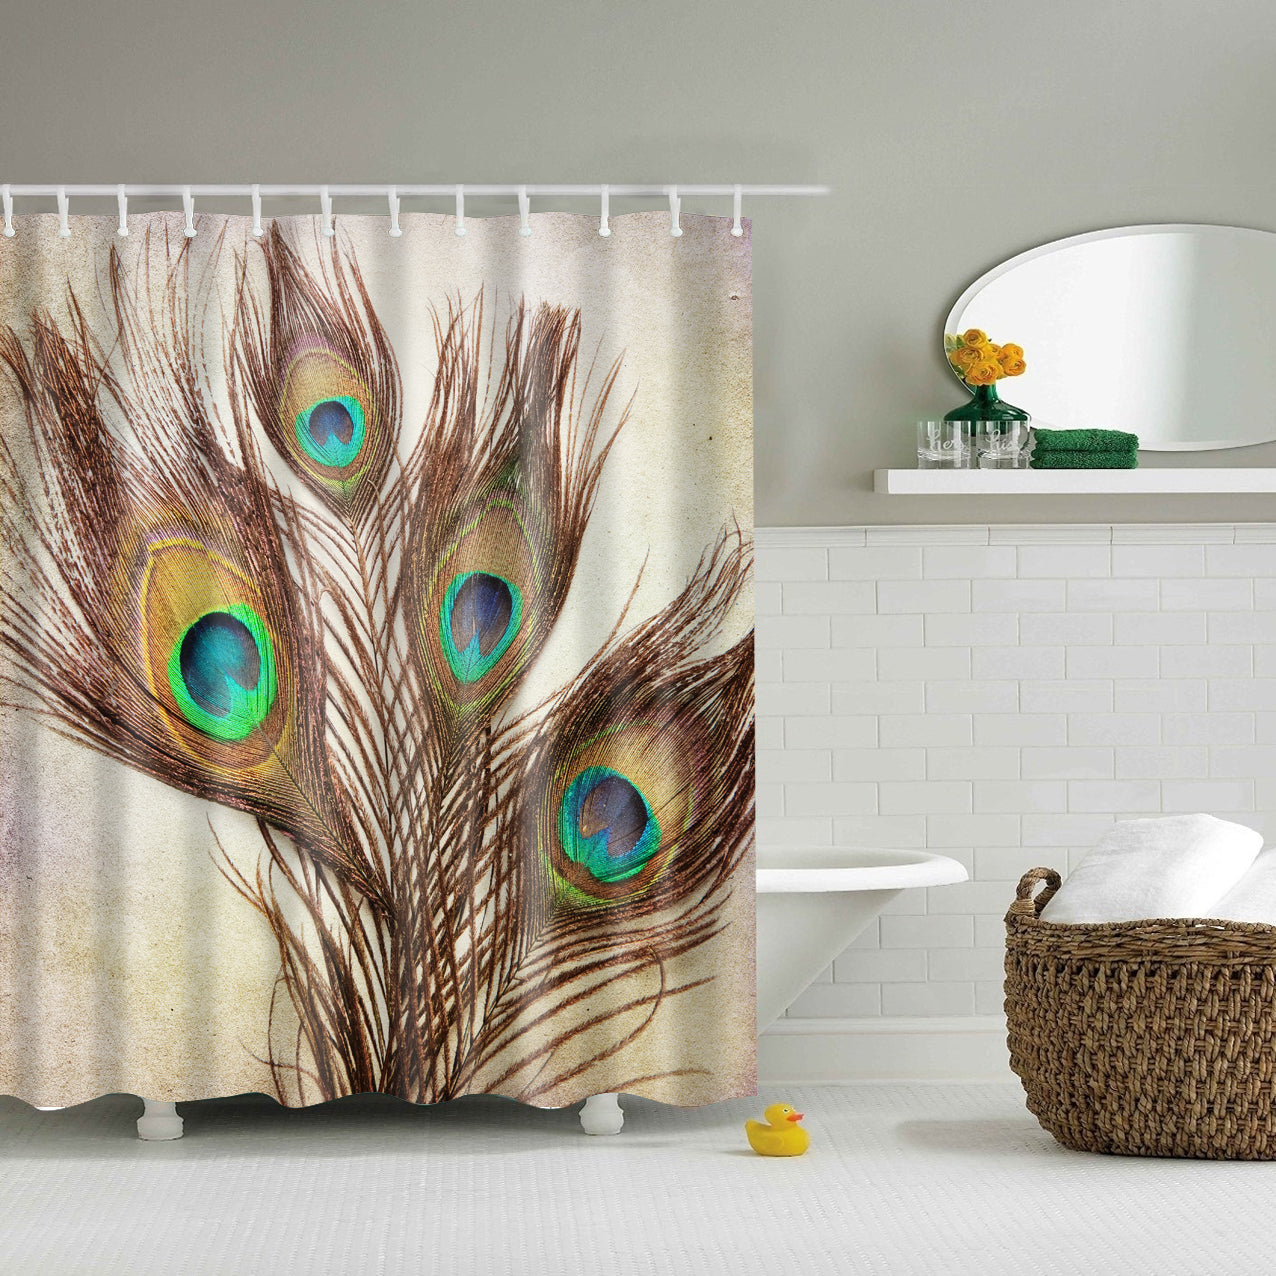 Vintage Peacock Feather Wall Art Shower Curtain